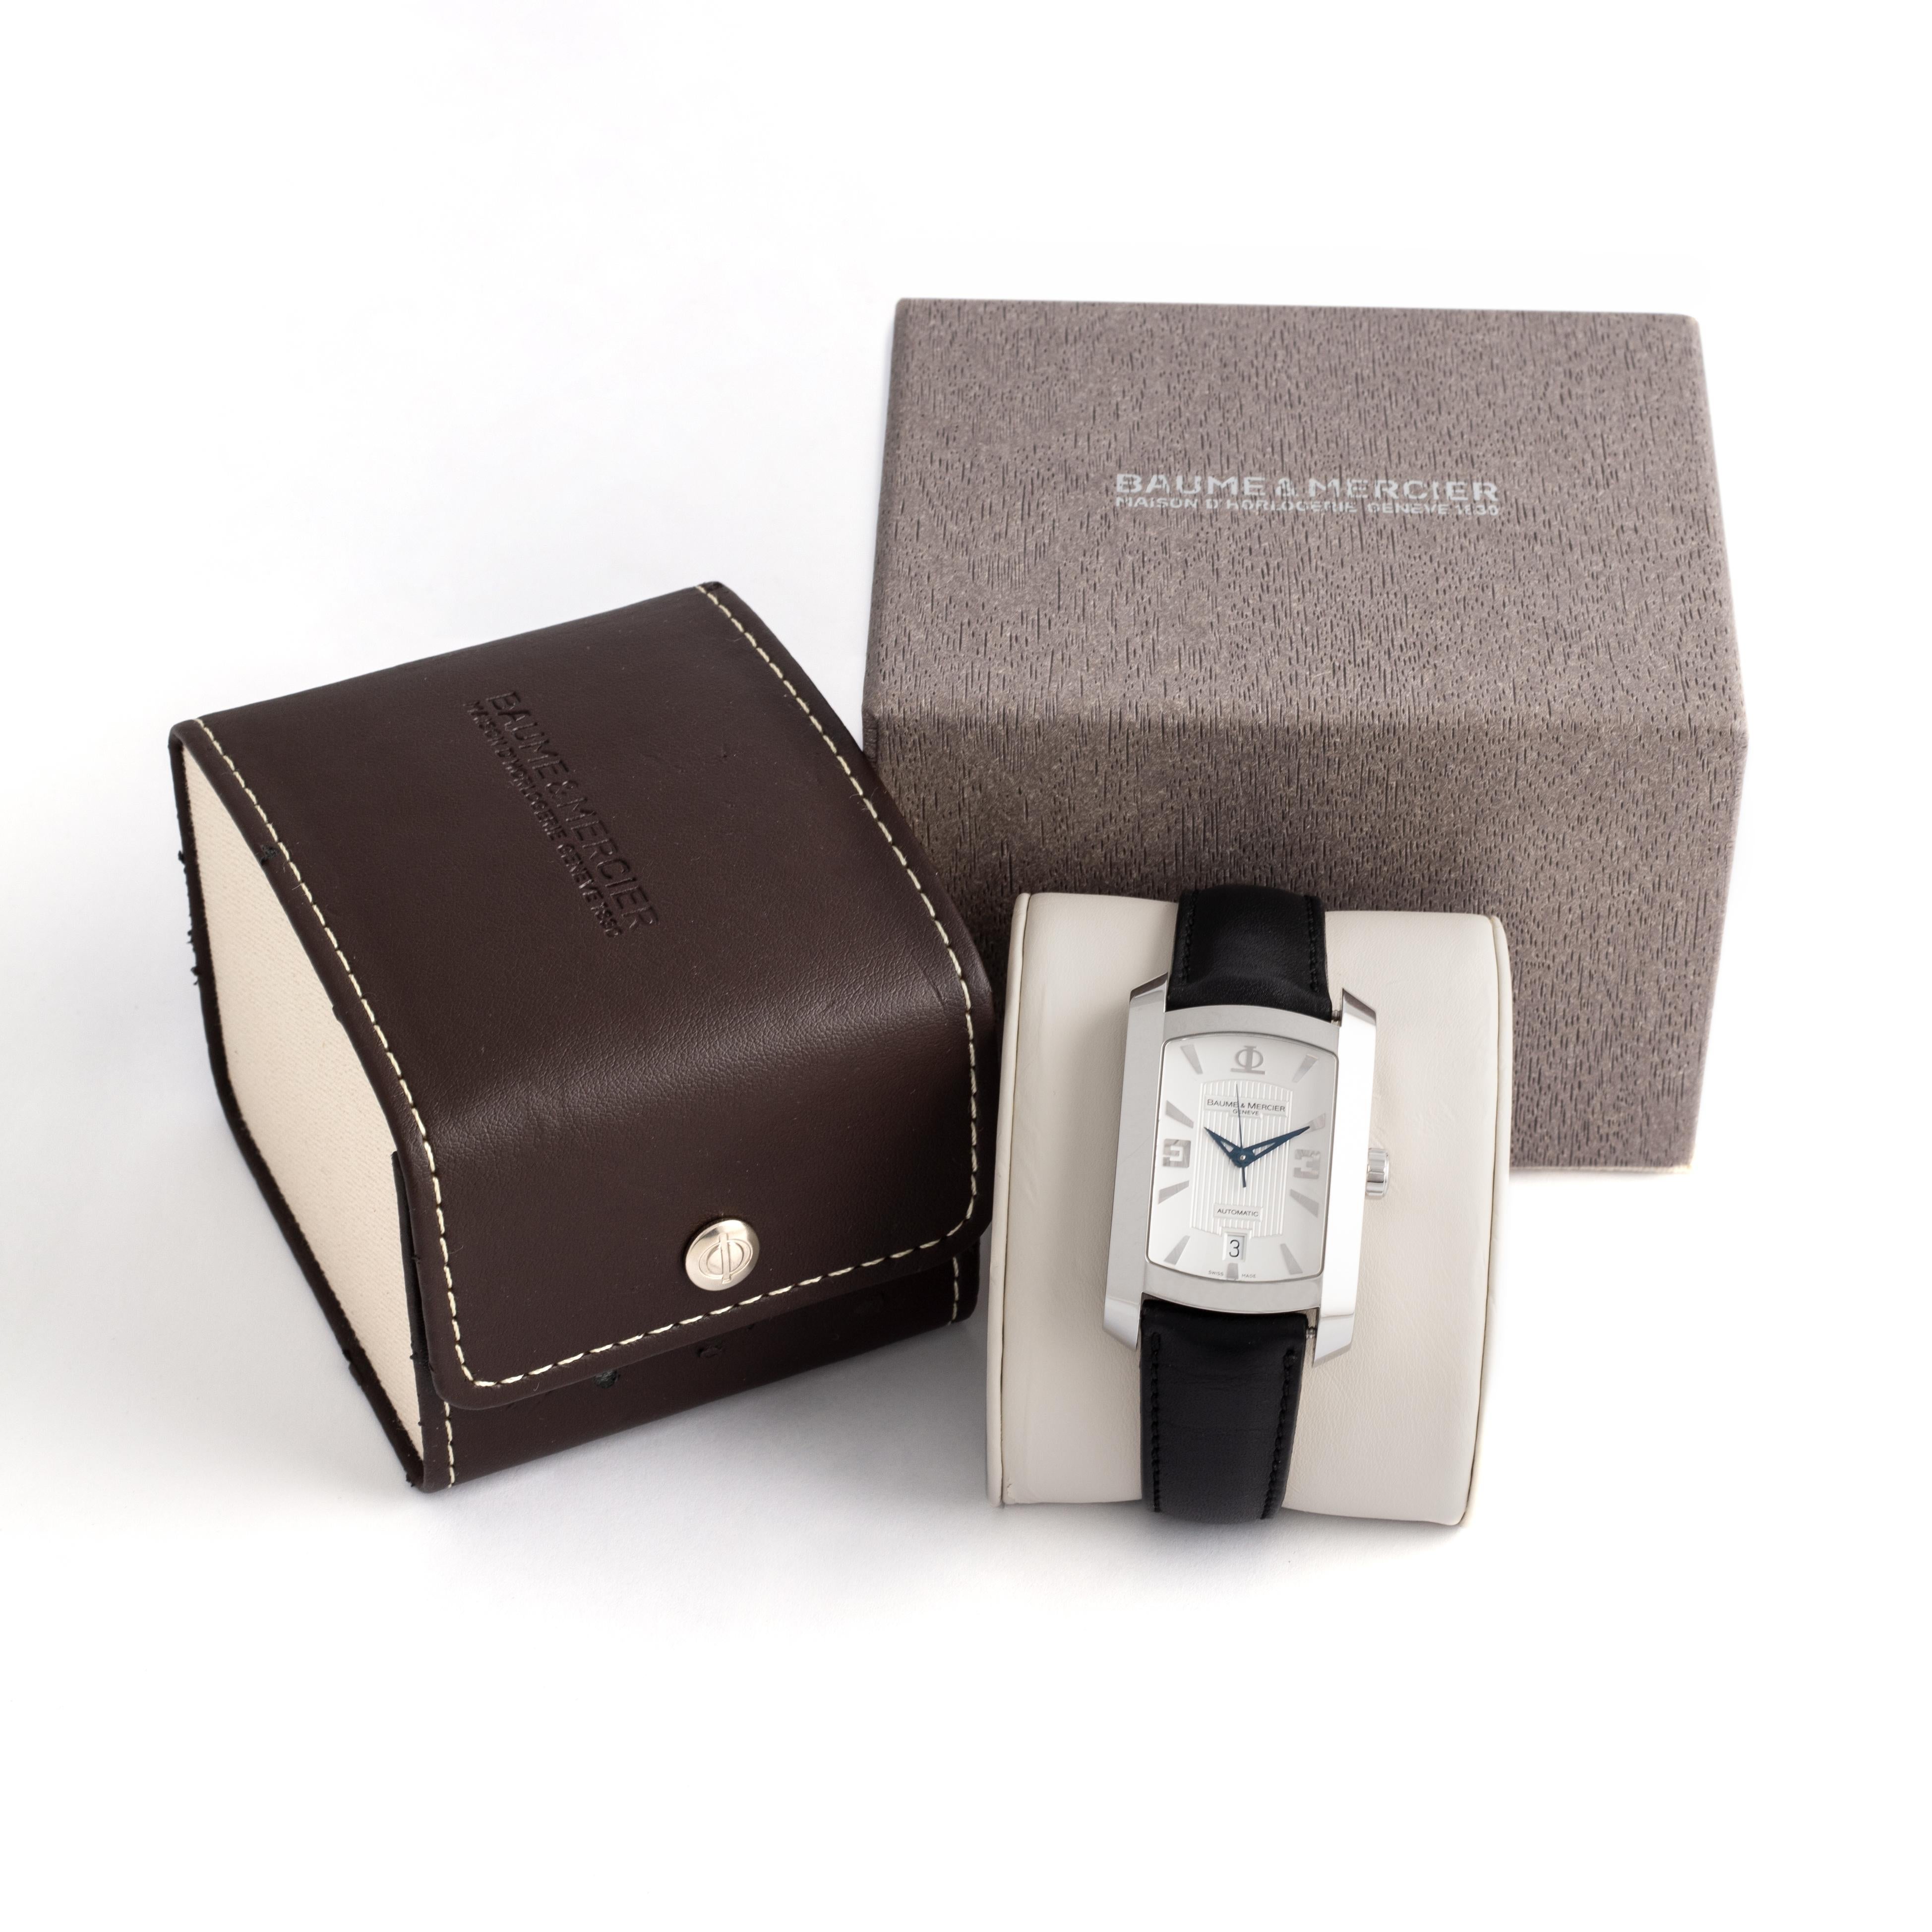 Baume & Mercier Hampton Milleis Steel Wristwatch
Leather Automatic XL, Silver ligne guilloche deco dial black cowhide leather bracelet.
Automatic movement.
Signed and numbered.
Original Baume & Mercier box.

We do not guarantee the functioning of